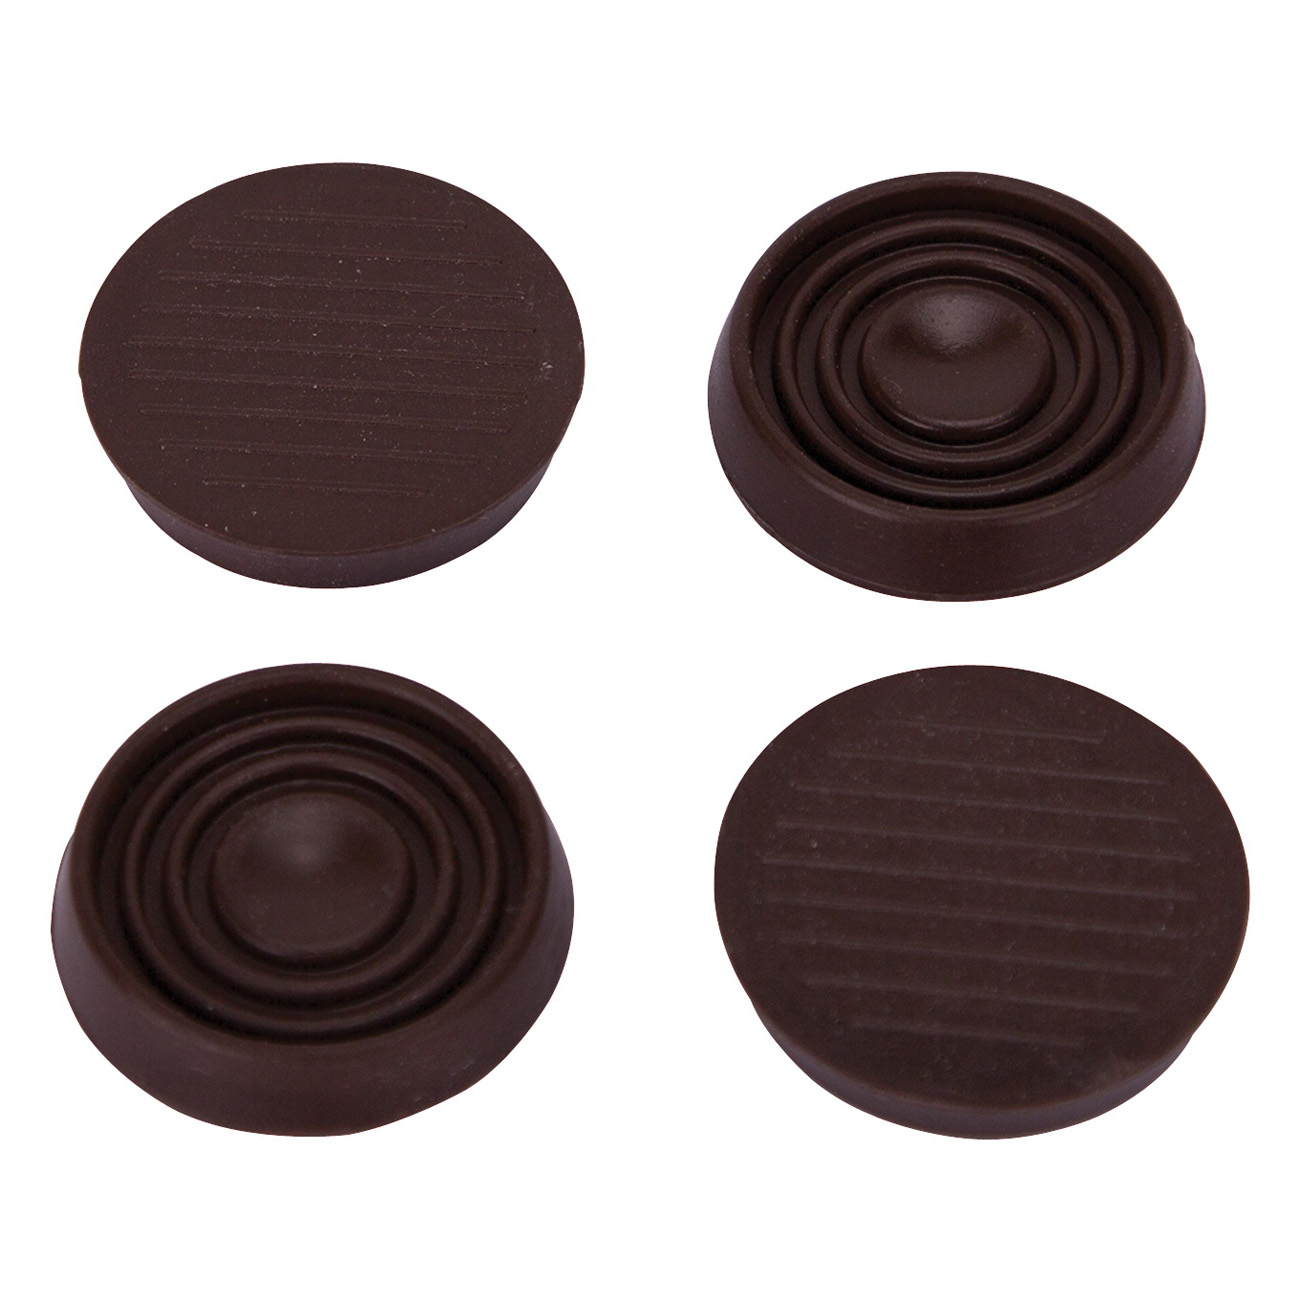 FE-S708-PS Caster Furniture Glide, Rubber, Brown, Brown, 1-3/4 x 1-3/4 x 3/8 in Dimensions